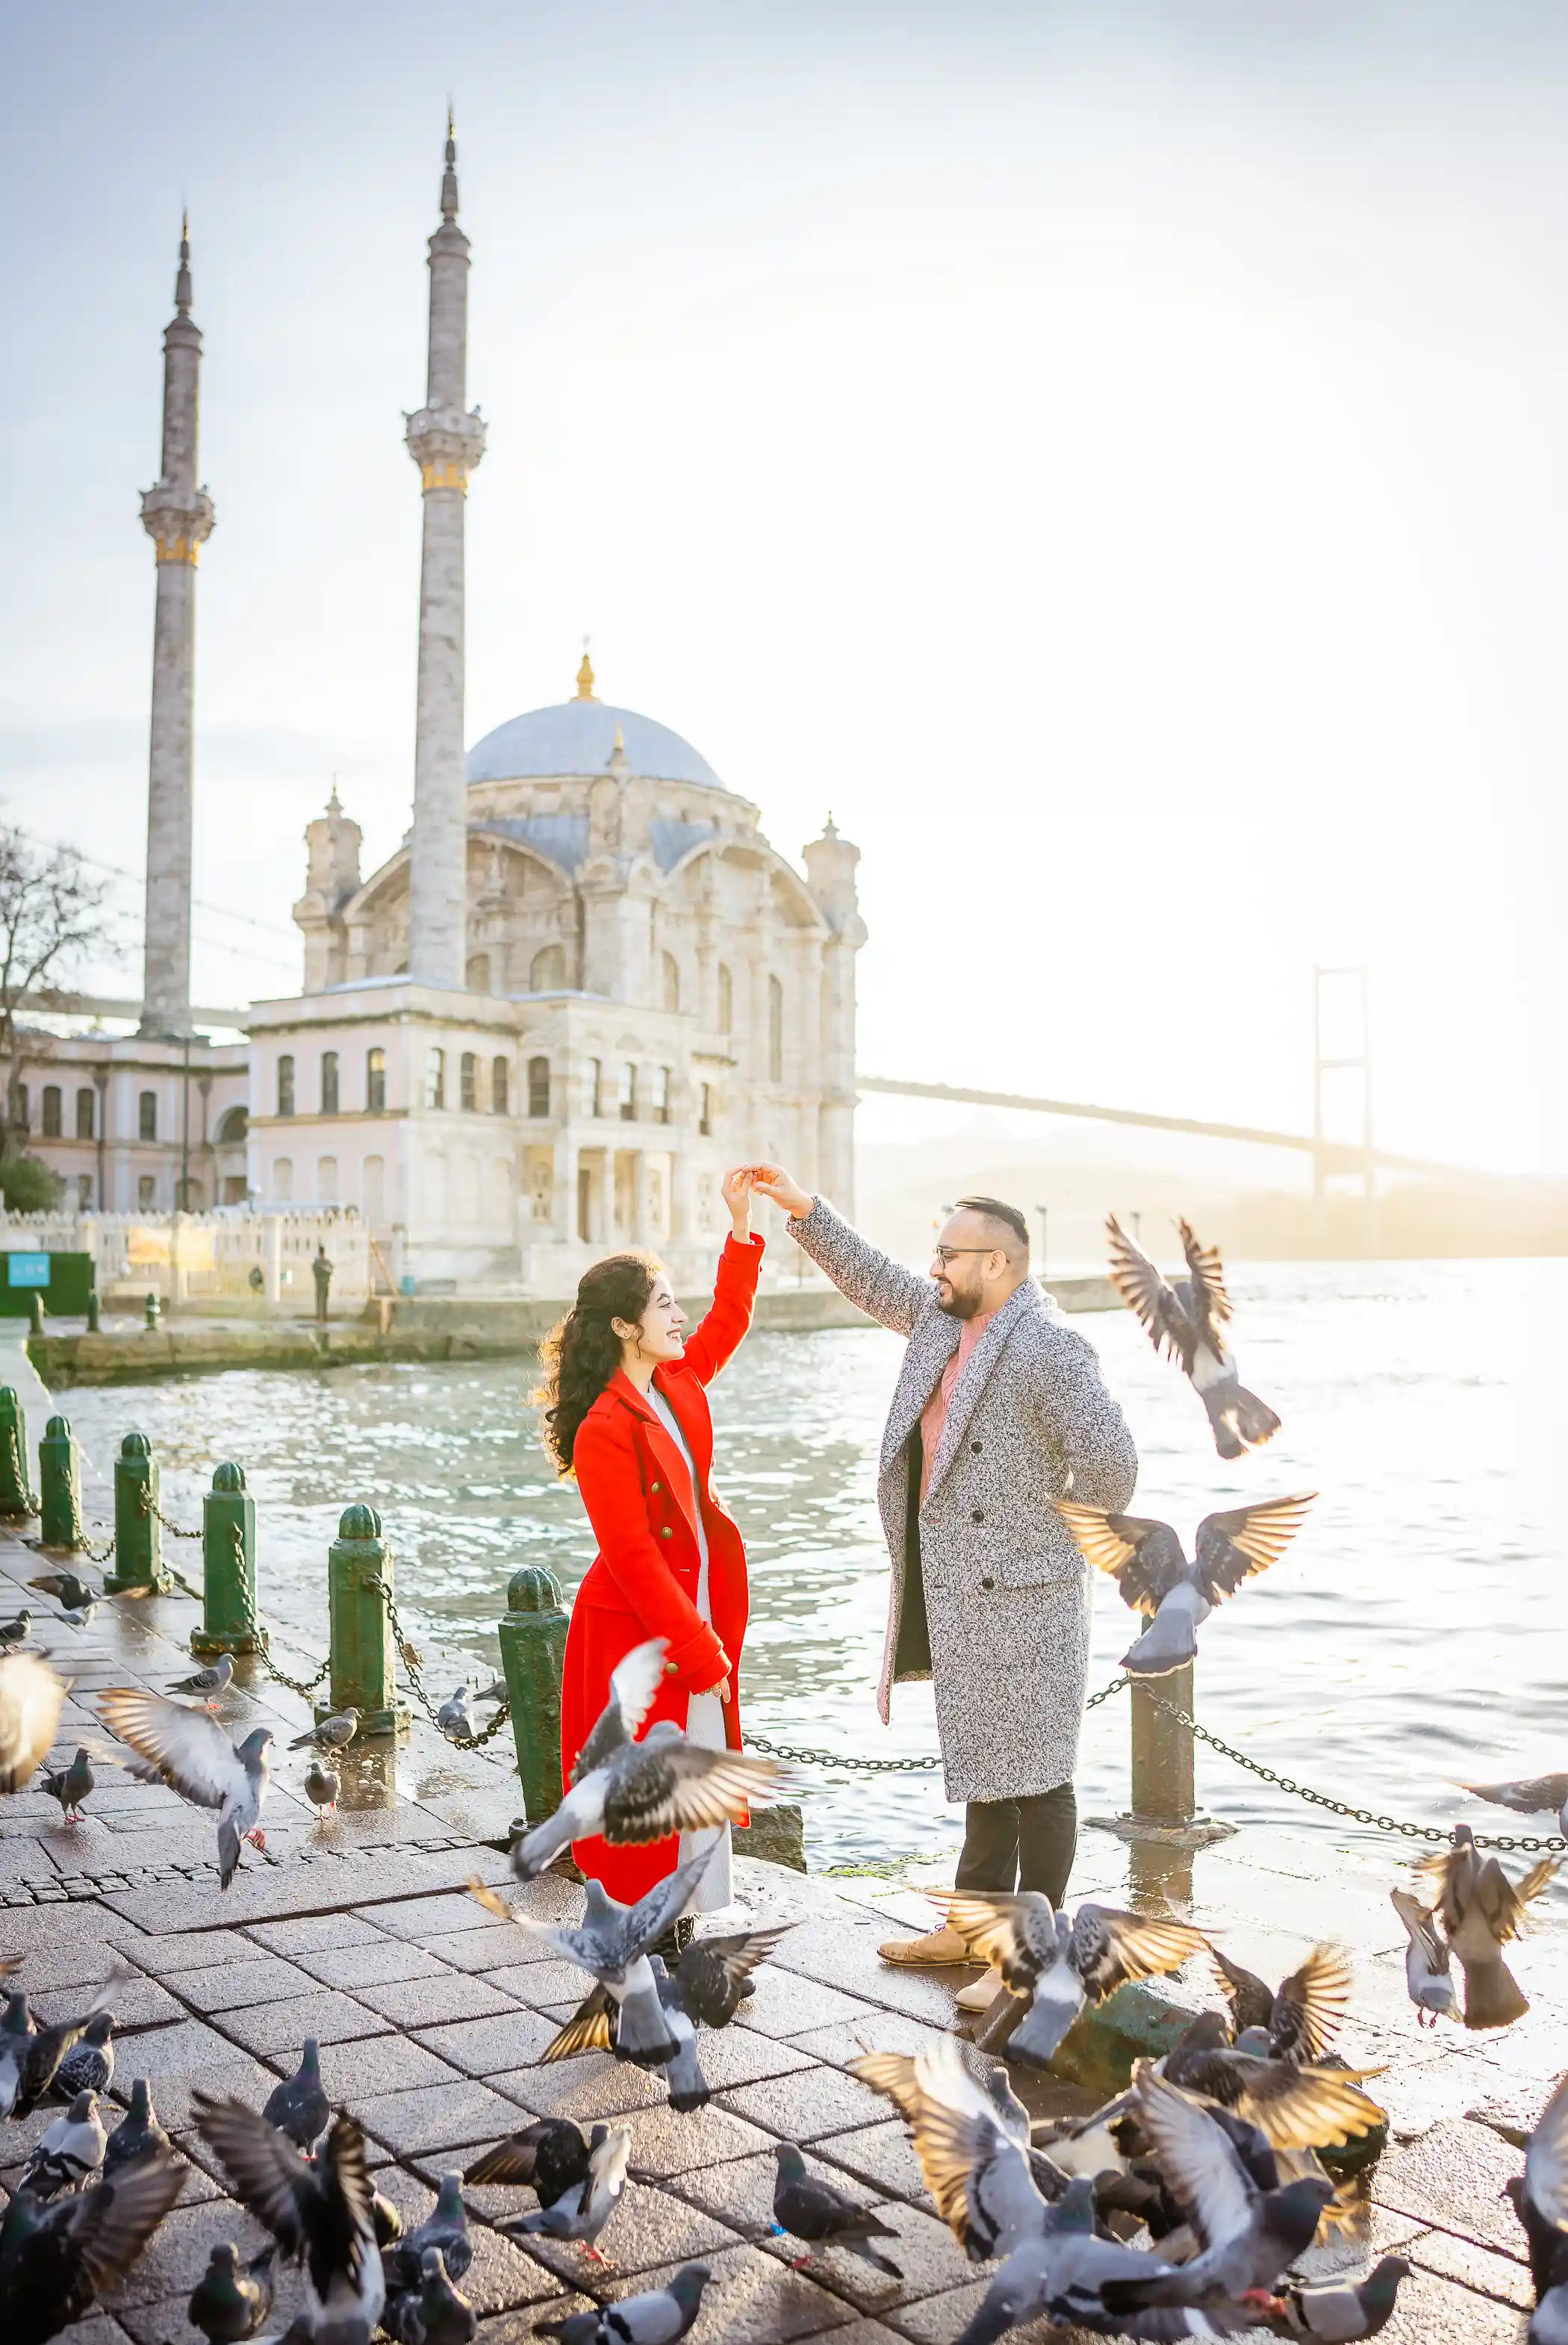 Ortaköy Mosque, nestled along the Bosphorus, exudes elegance and serenity. Its delicate minarets and intricate architecture make it a photographer’s paradise. As the sun rises, the mosque’s silhouette stands out against the azure sky, creating a magical ambiance.